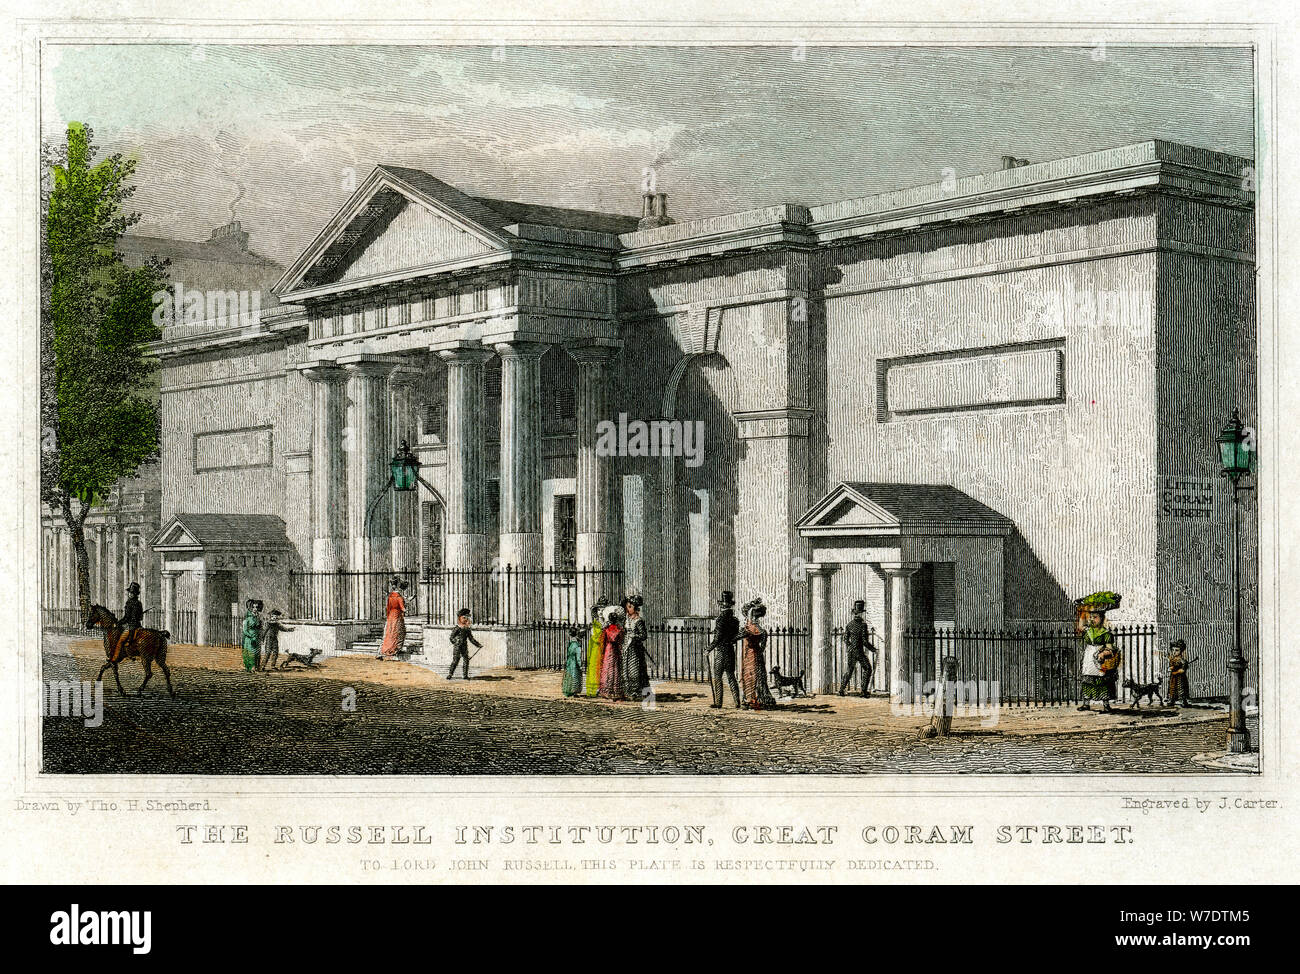 L'Institution Russell, Great Coram Street, Bloomsbury, Londres, 1828.Artiste : VALERO Banque D'Images